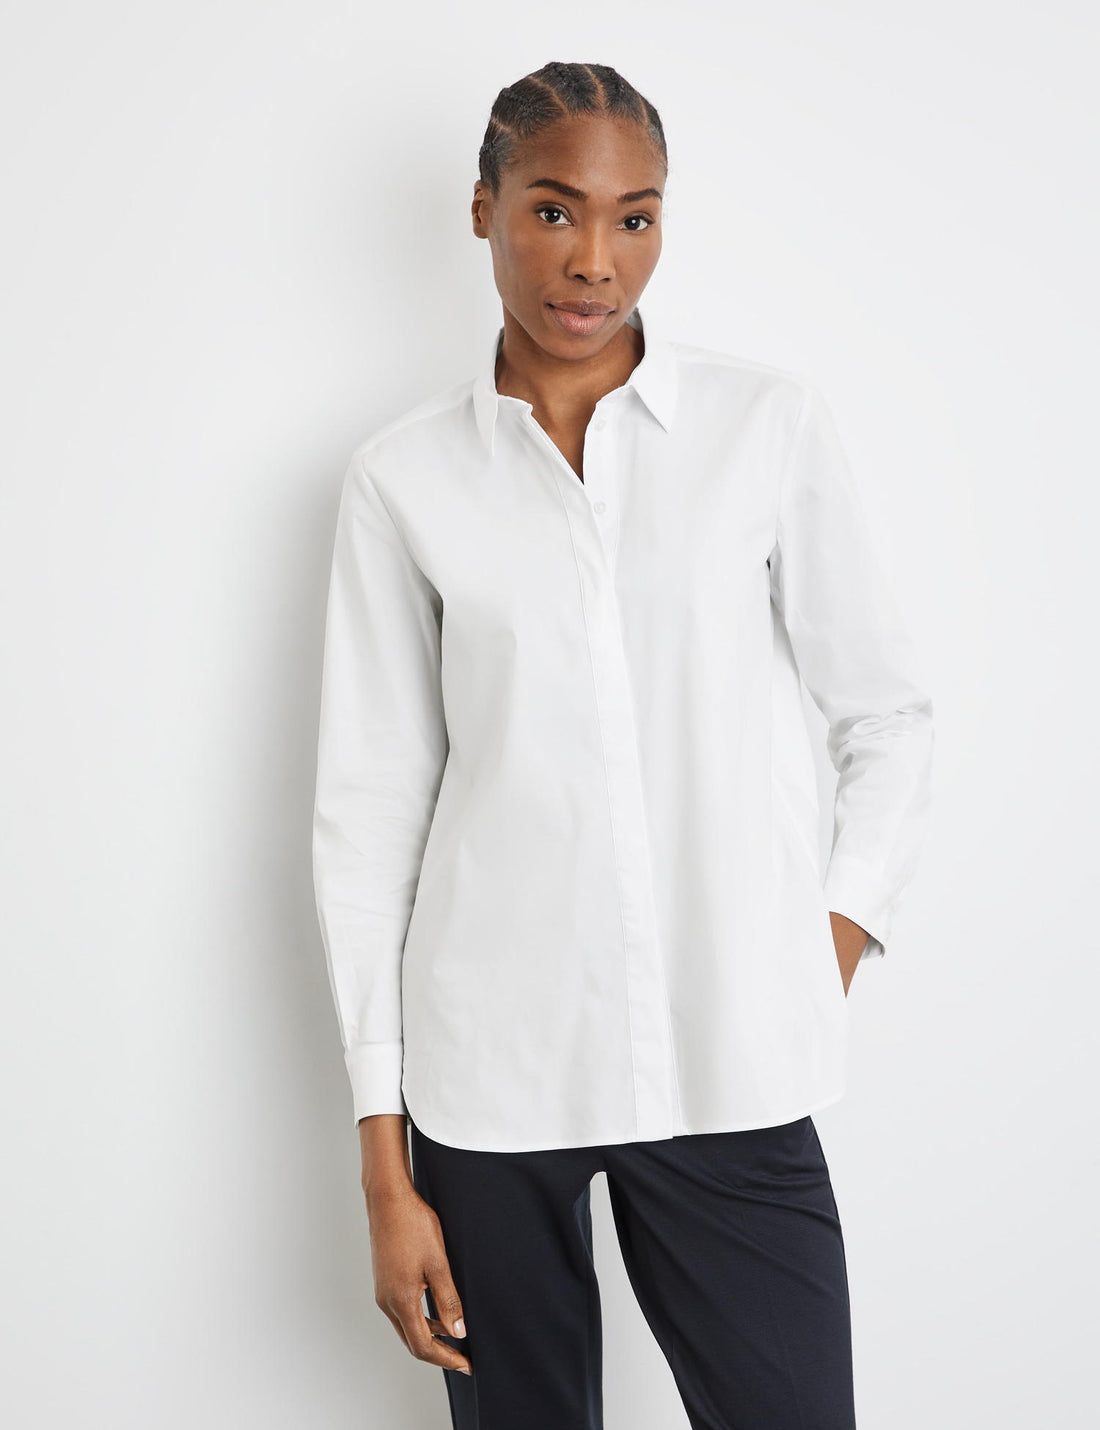 Simple Shirt Blouse With An Elongated Back_965033-31443_99600_01